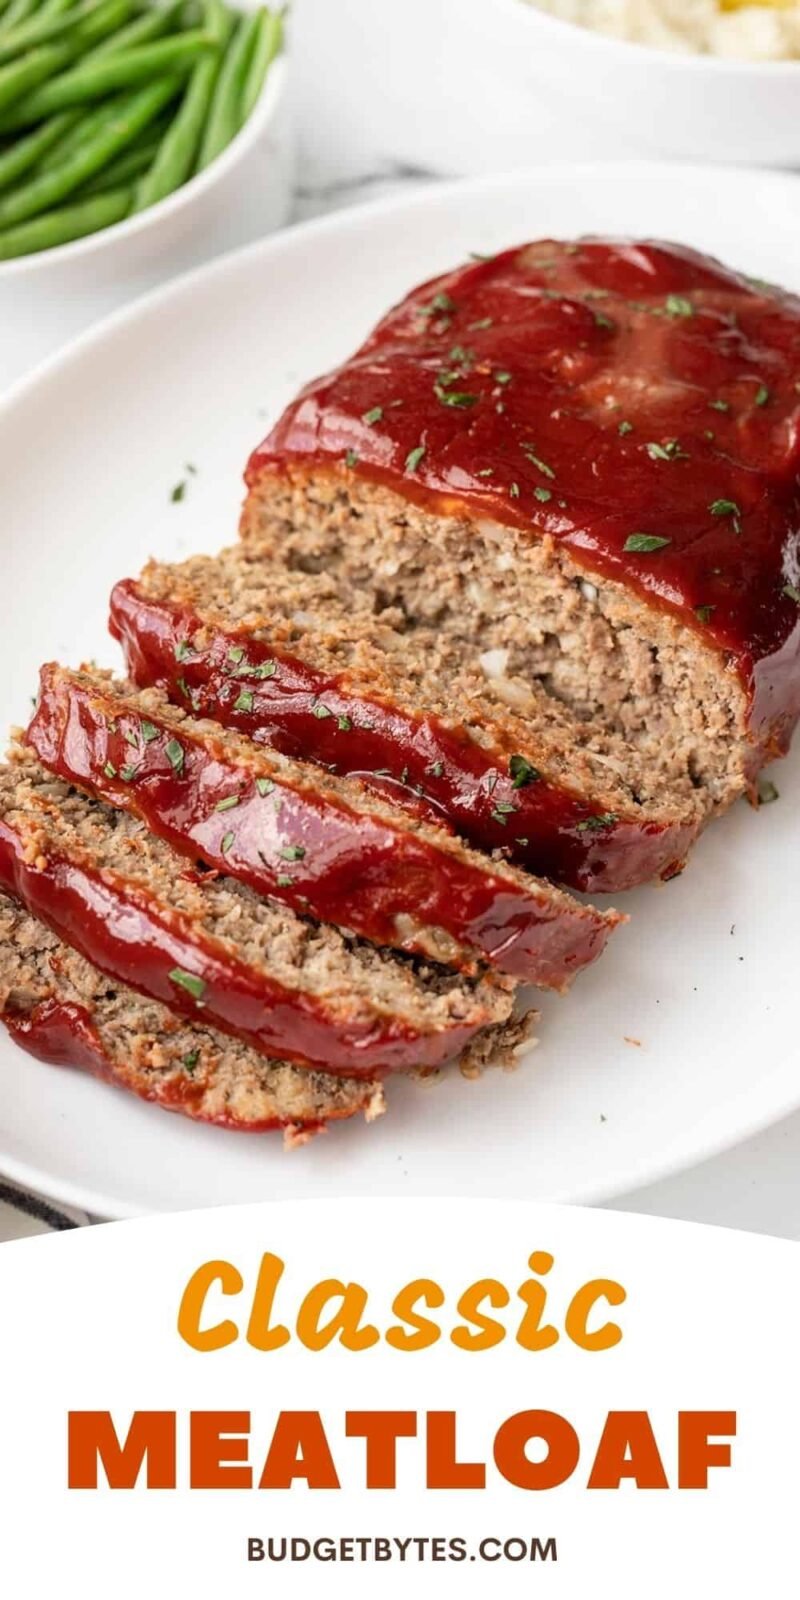 Side view of a sliced meatloaf, title text at the bottom